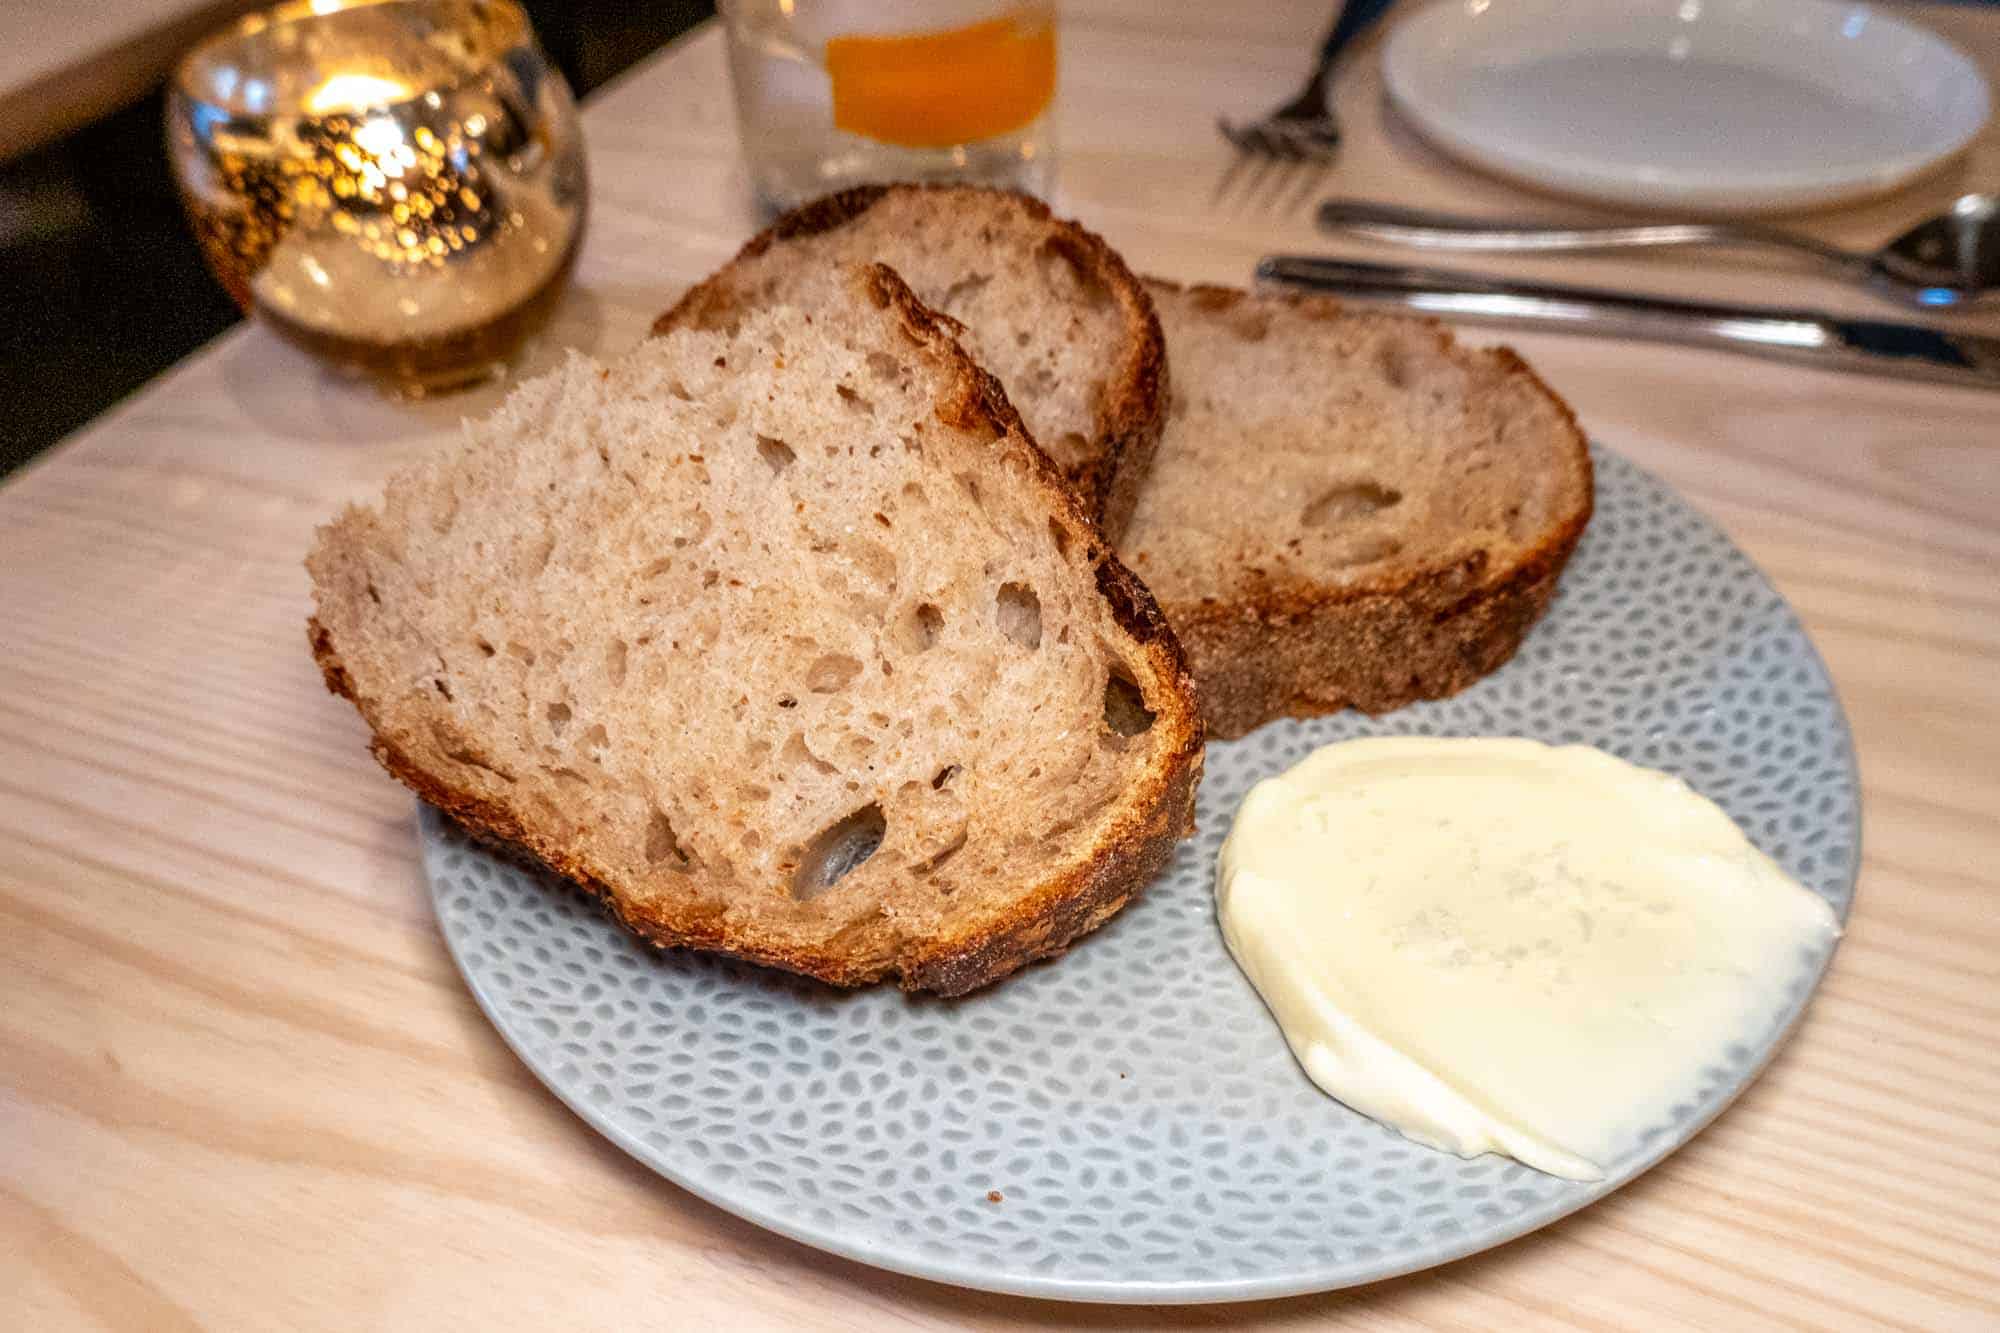 Bread and butter on plate